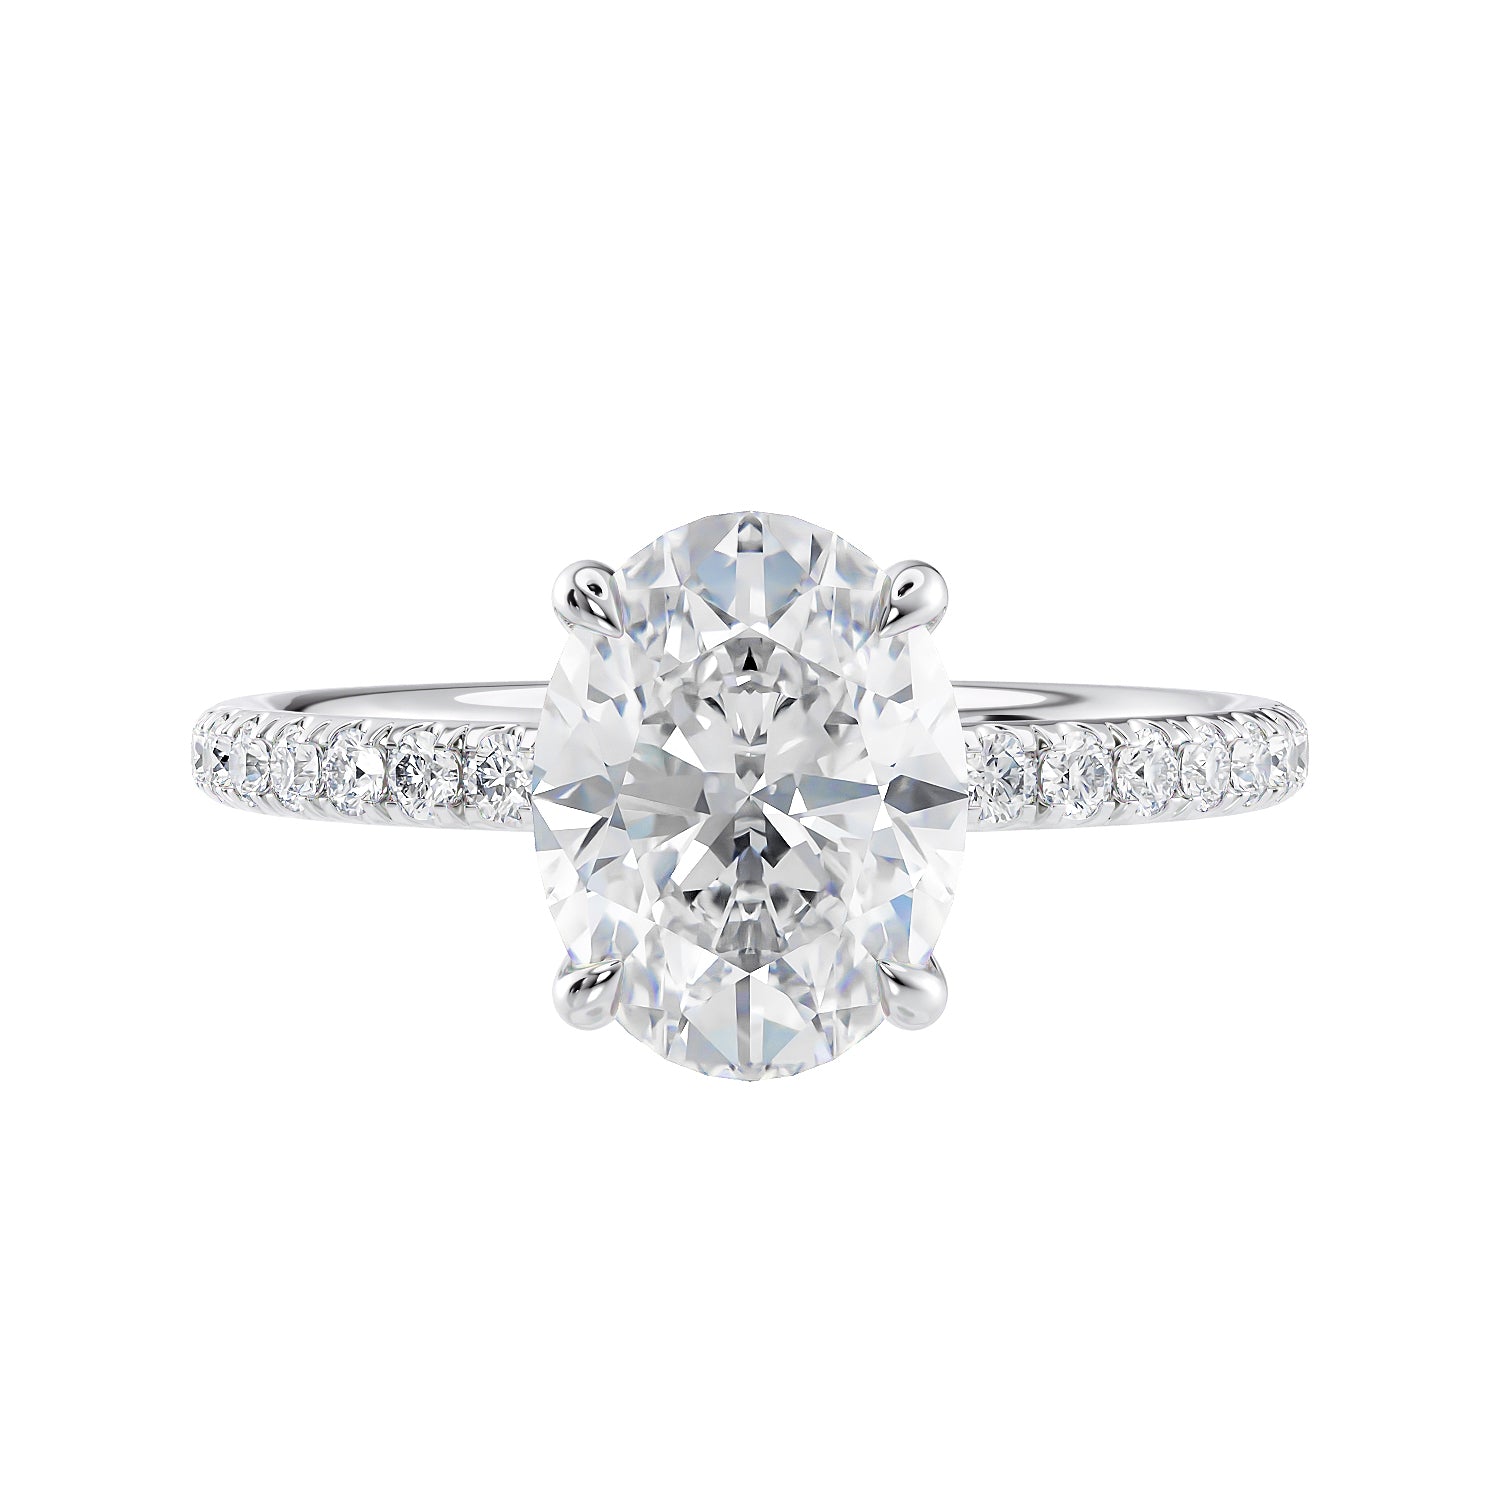 Oval diamond engagement ring with diamond band white gold front view.